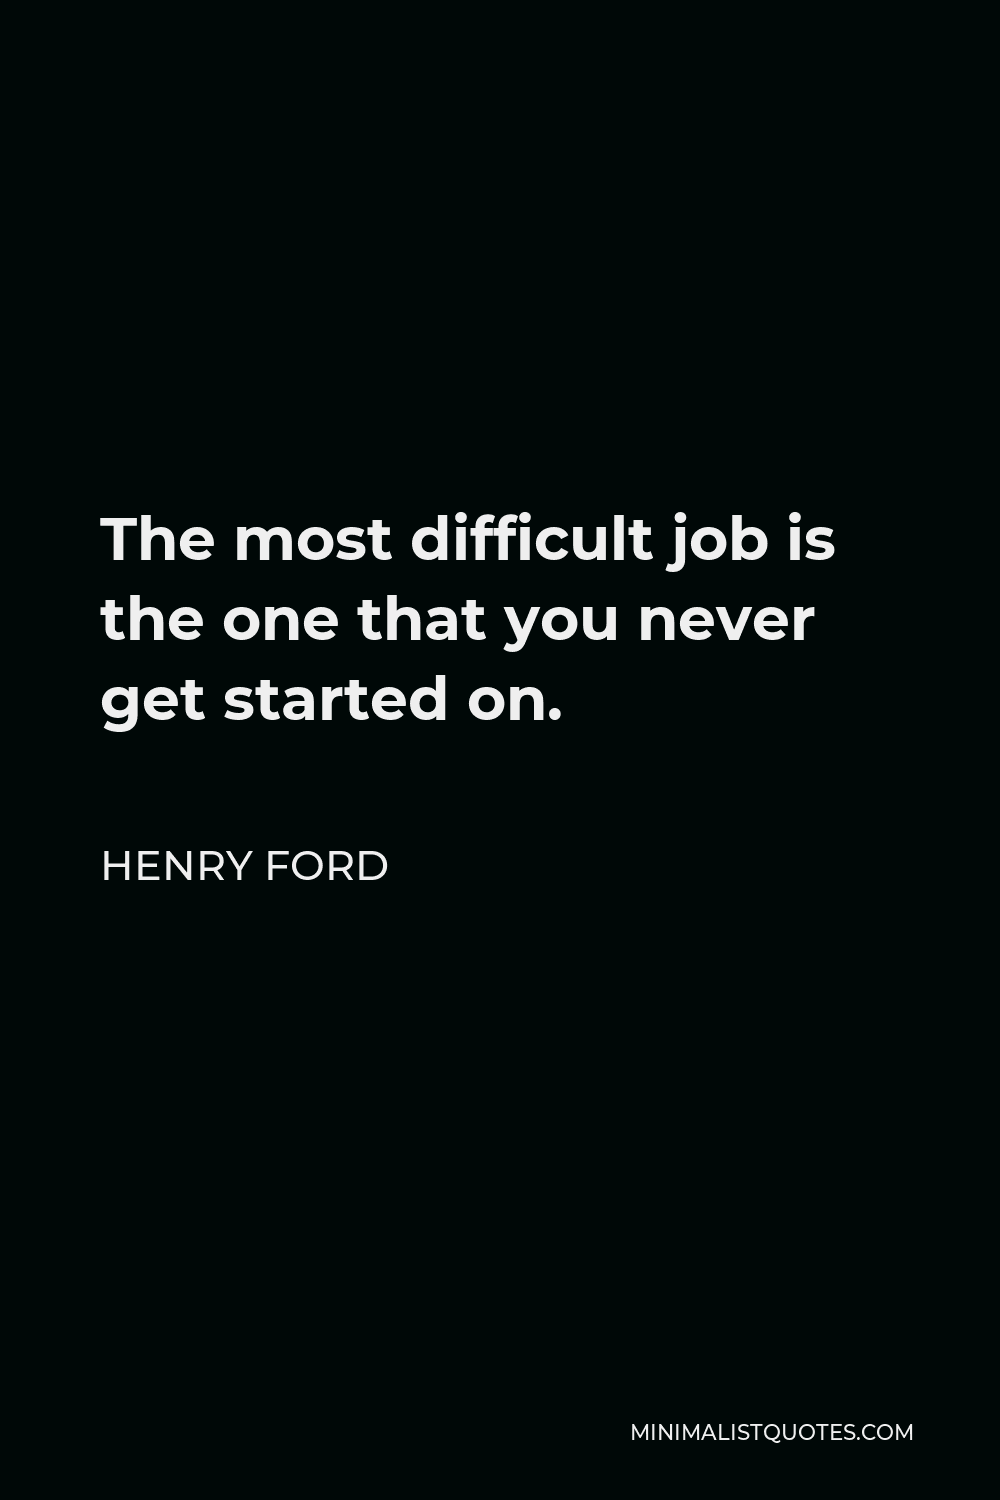 Henry Ford Quote - The most difficult job is the one that you never get started on.